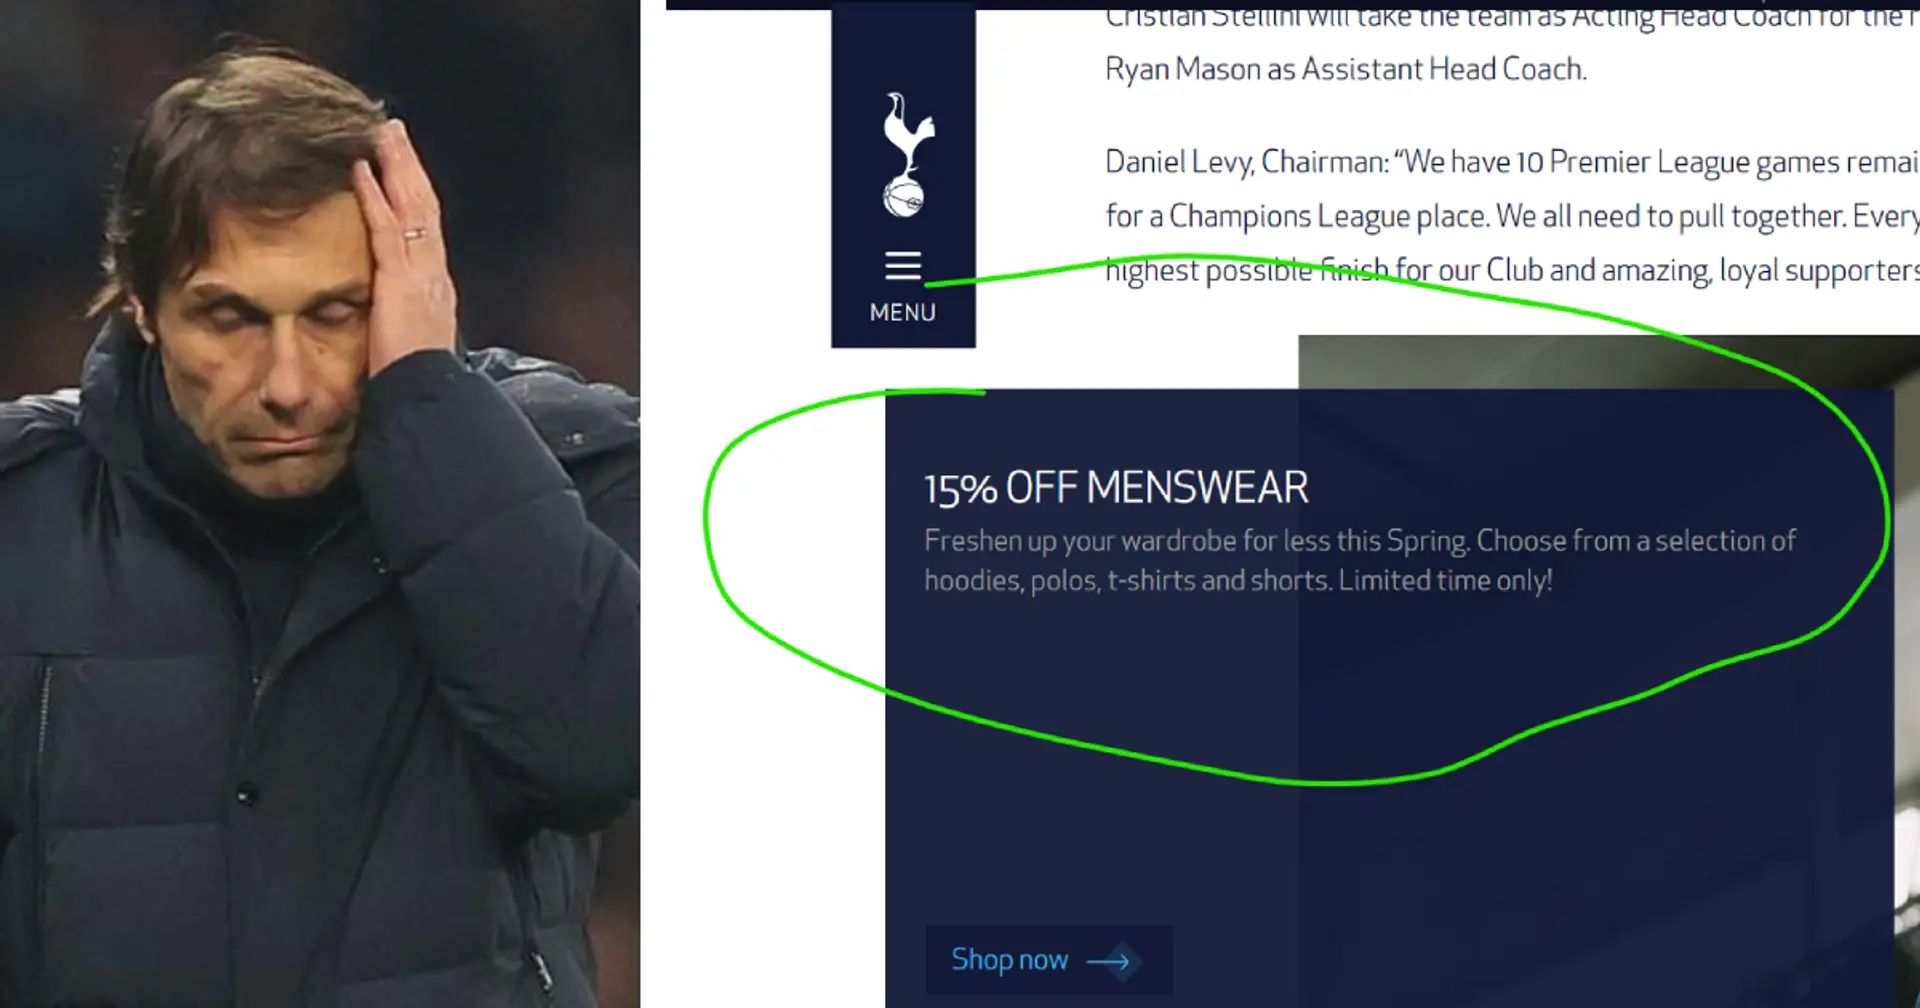 Conte sacked on Arteta's birthday: Spurs use it to advertise 15% discount on hoodies while Arsenal fans mock their rivals